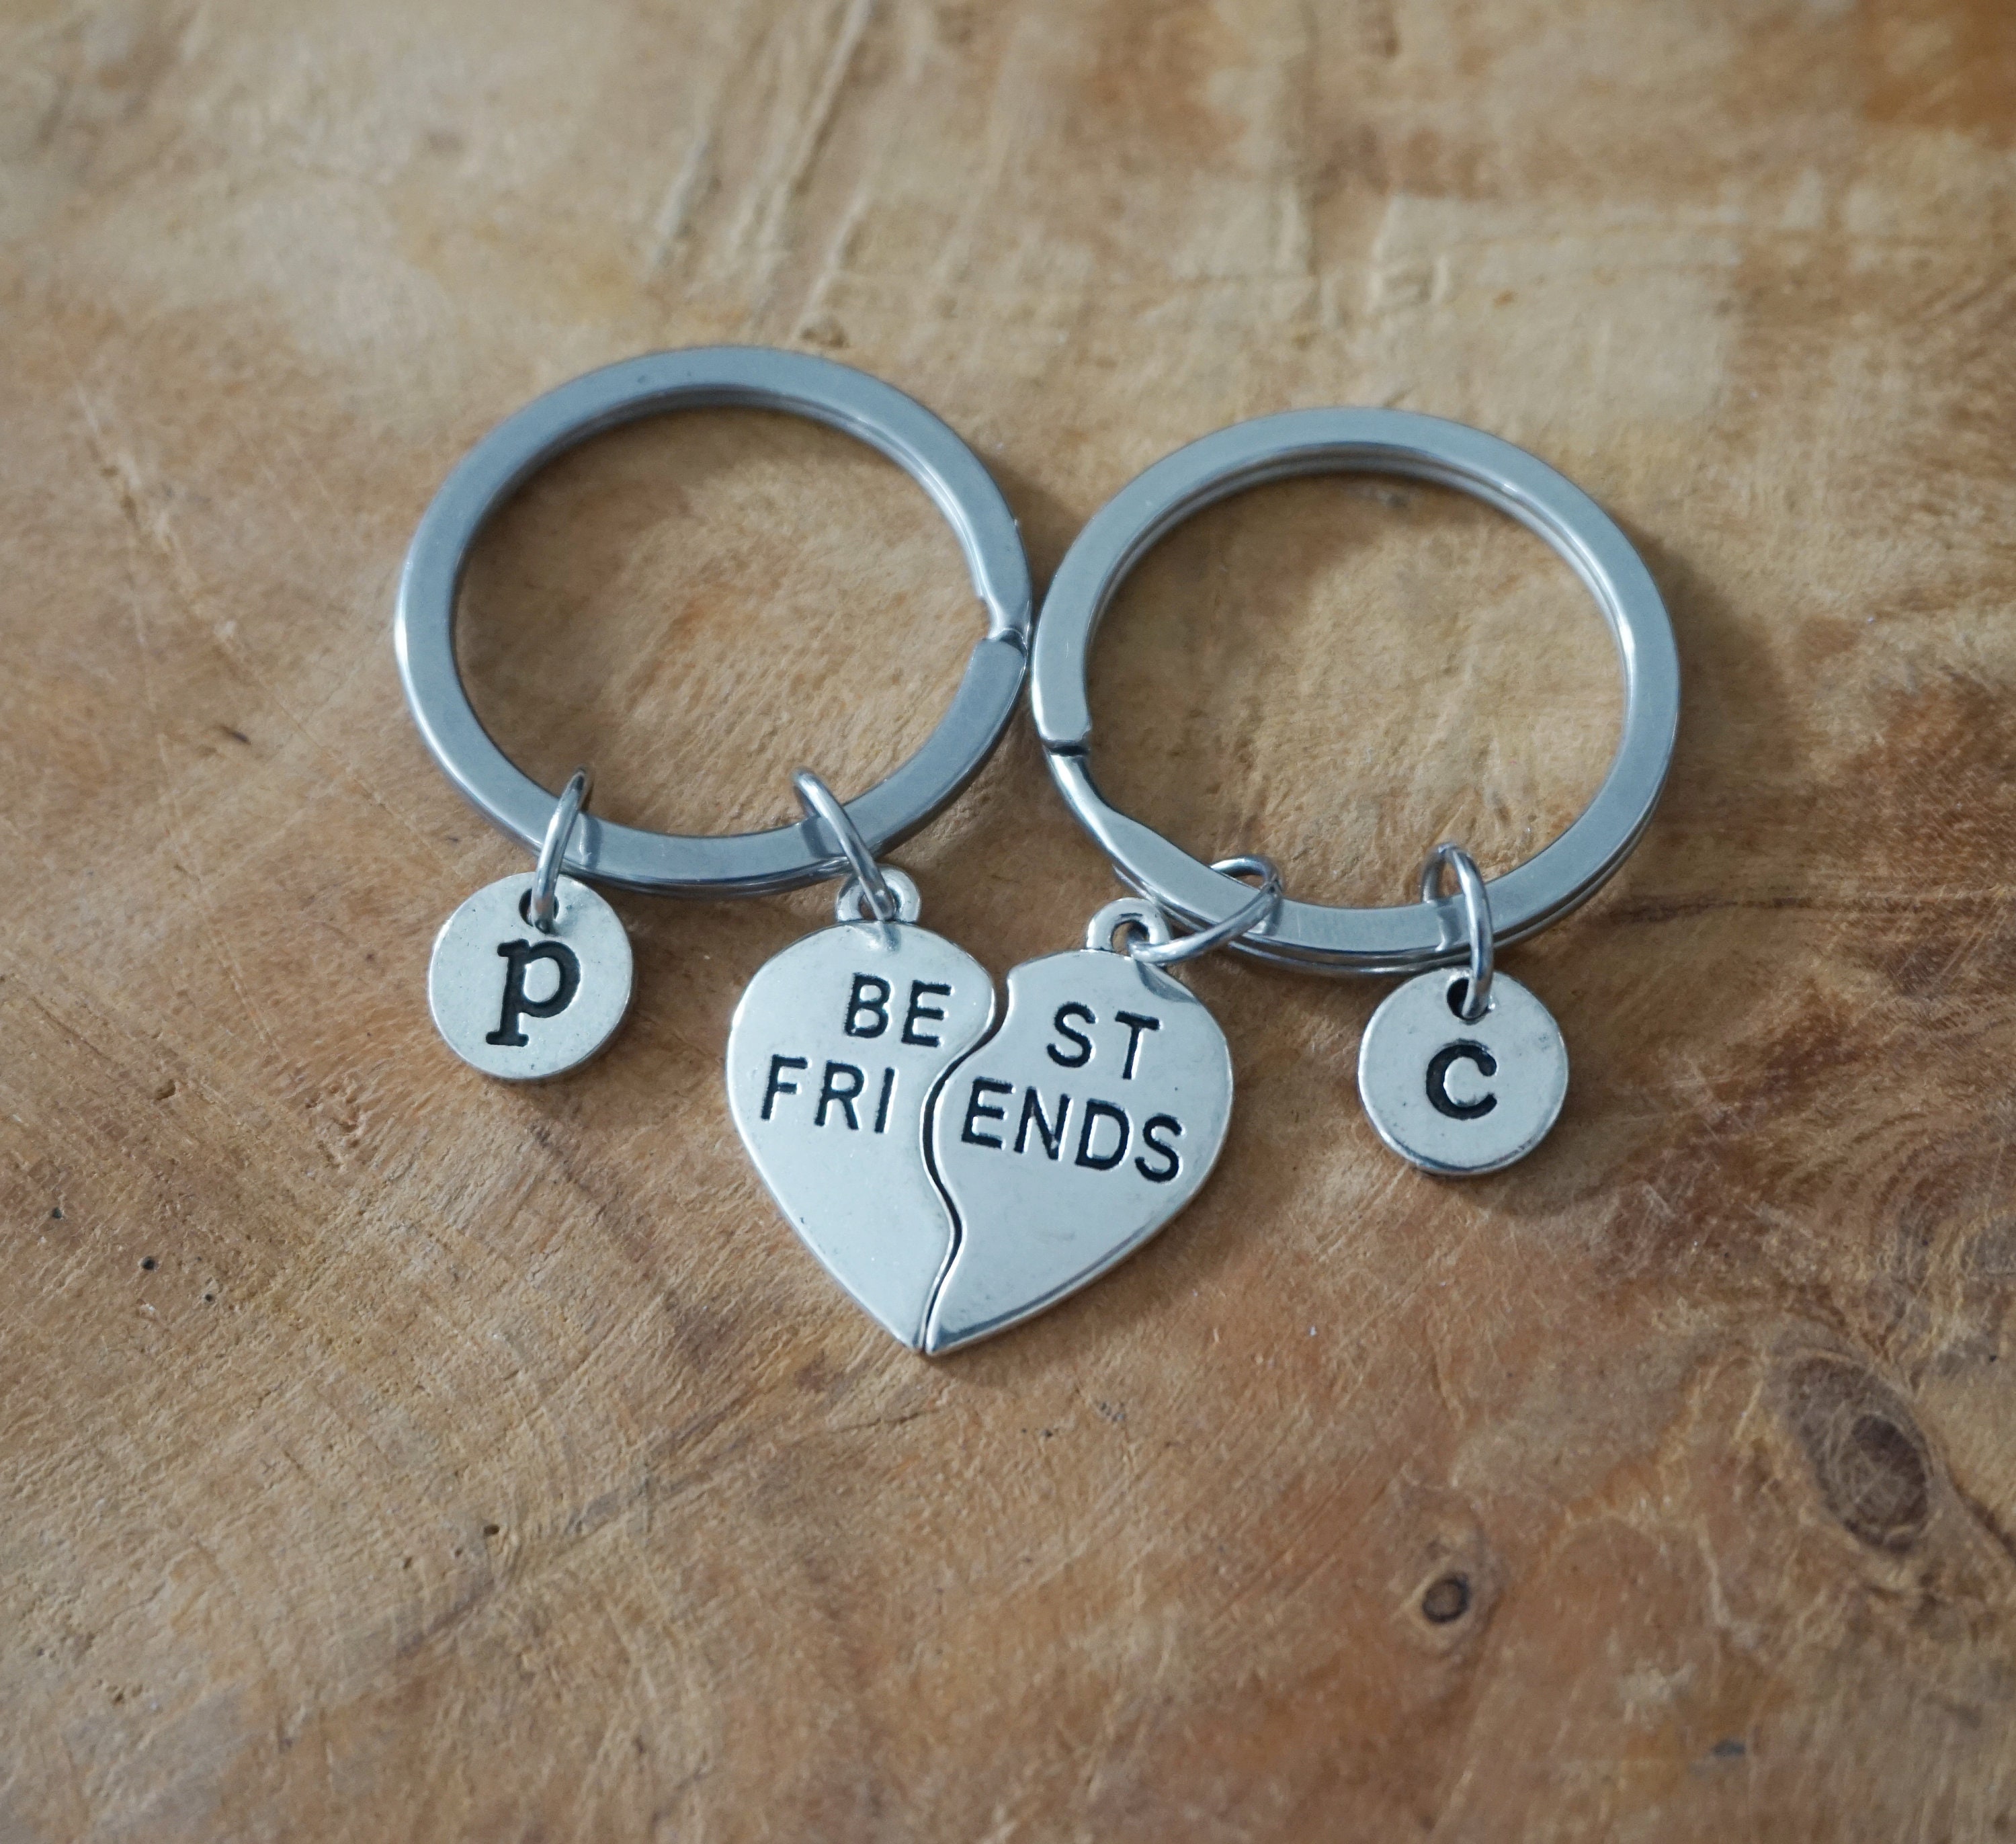 JOVIVI Friendship Gifts for Girls,5pc Best Friends and Forever Keyrings Keychains Women Heart Puzzle BBF Friendship Key Chain Ring for Women Birthday Christmas Gifts